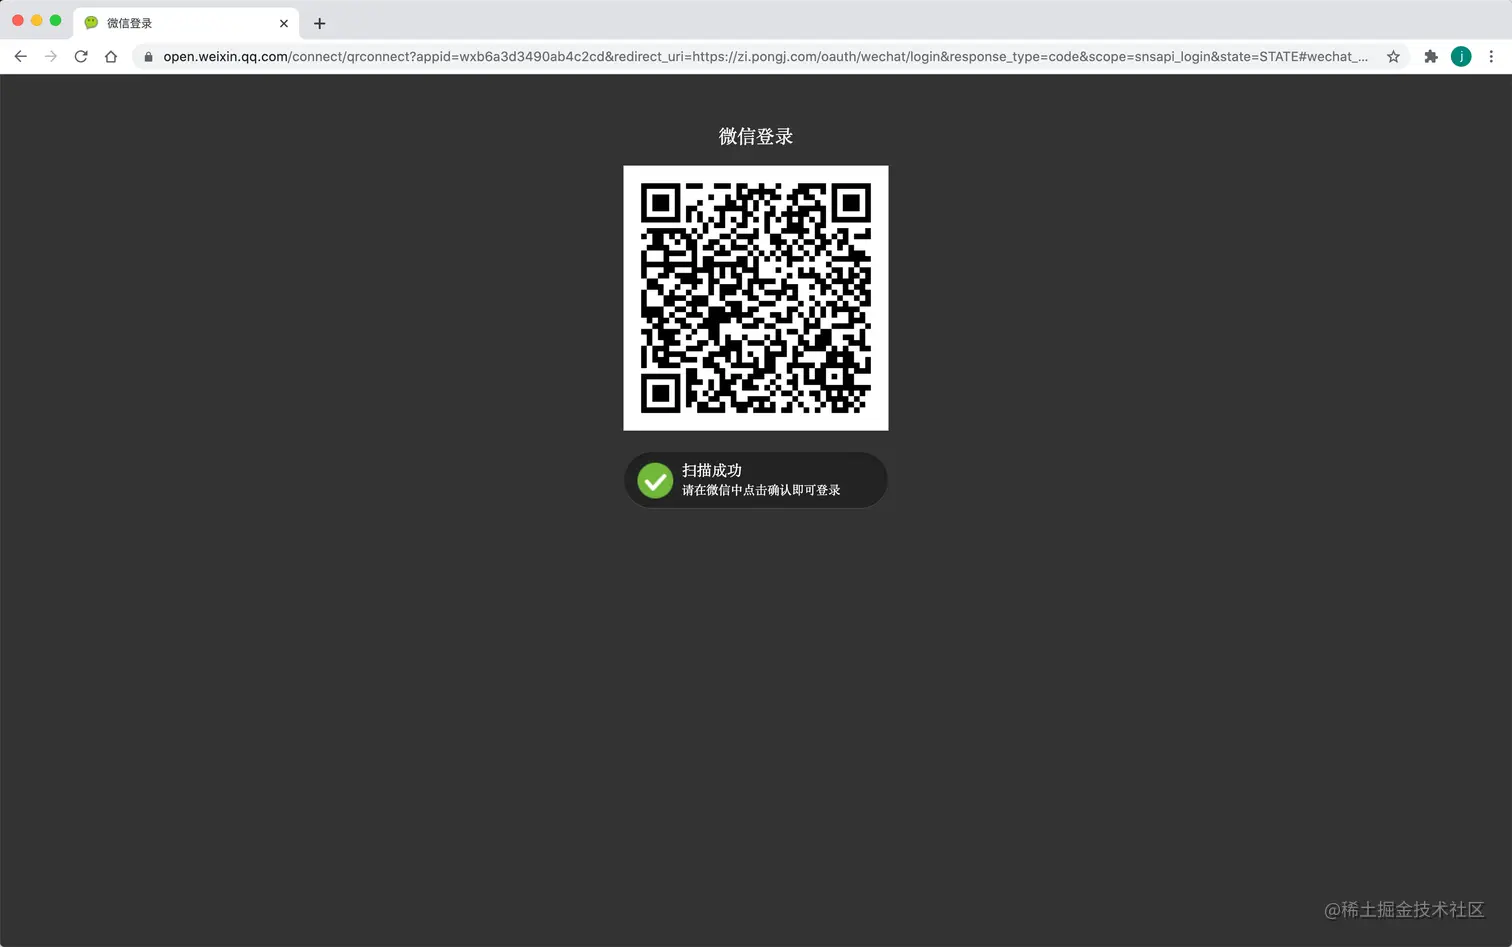 request-wechat-user-to-authorize